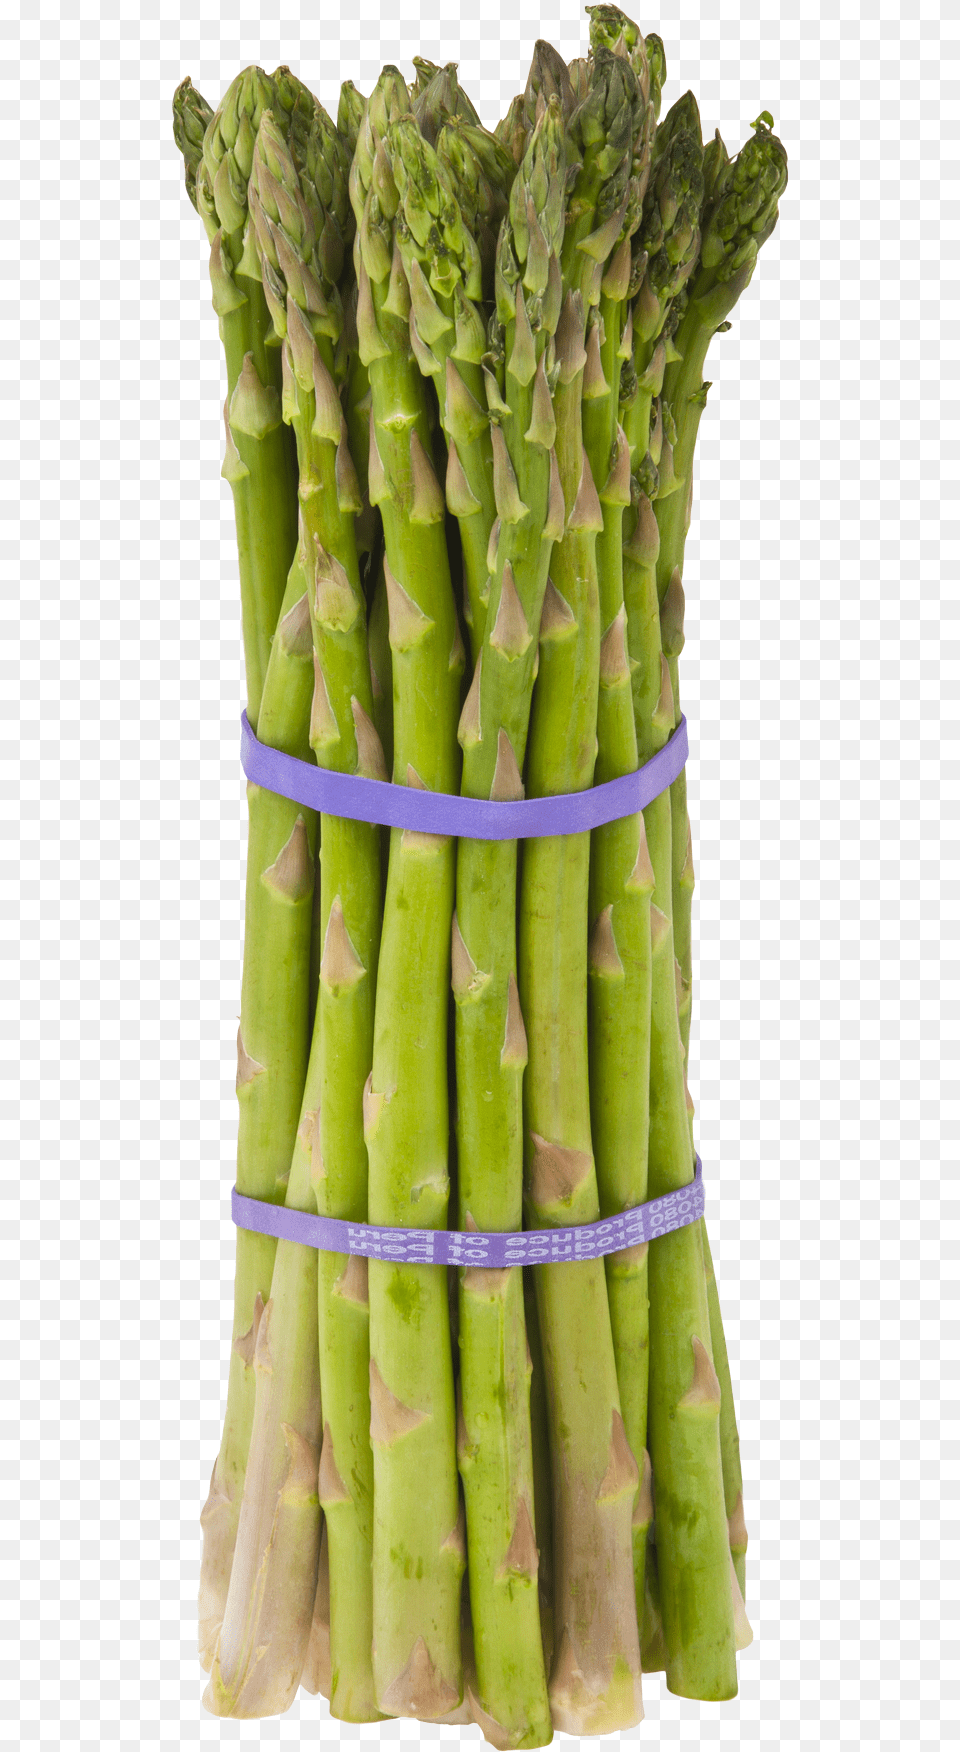 Download Asparagus For Free Asparagus Meaning In Bengali, Food, Plant, Produce, Vegetable Png